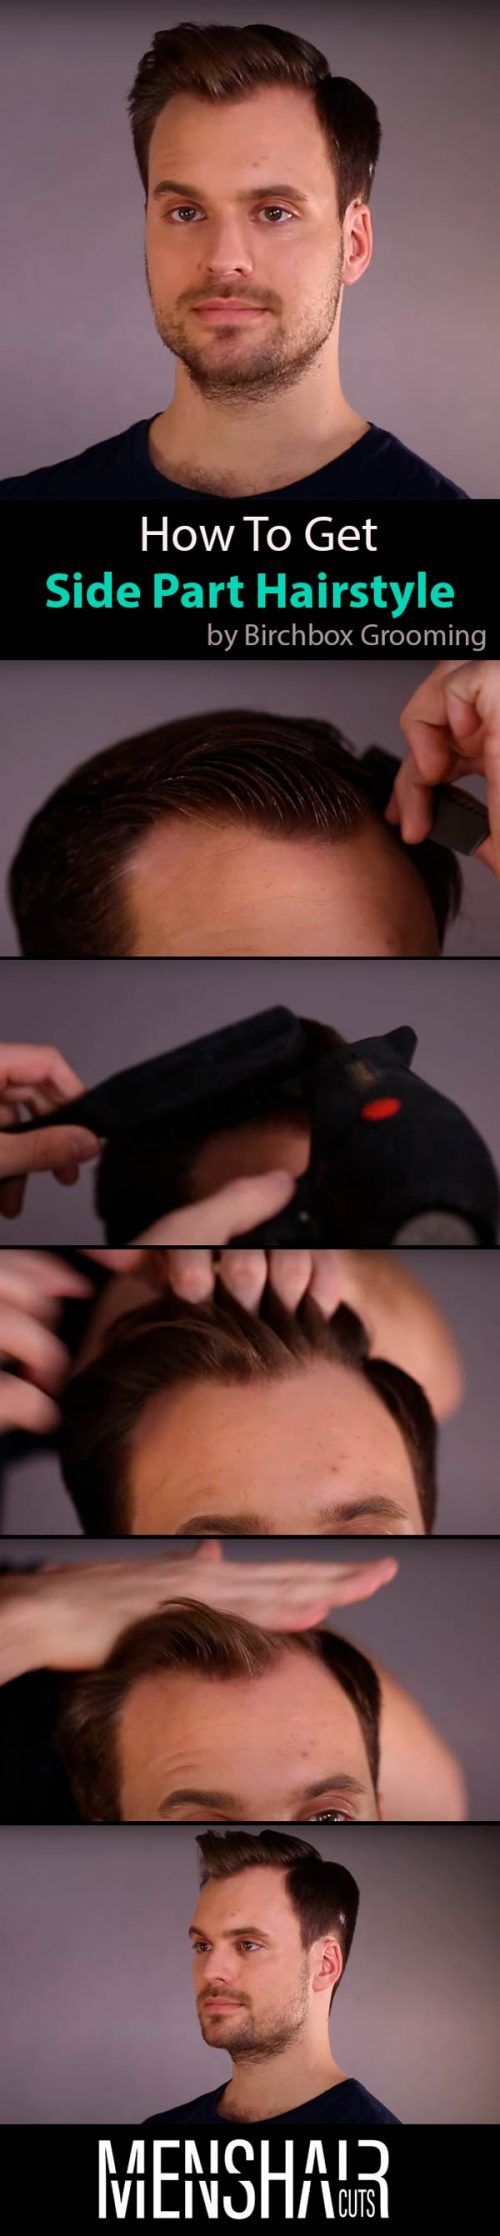 How To Style The Side Part #shorthairstylesformen #shorthairmen #mensshorthaircuts #shorthaircutsformen #howtostyleshorthair 